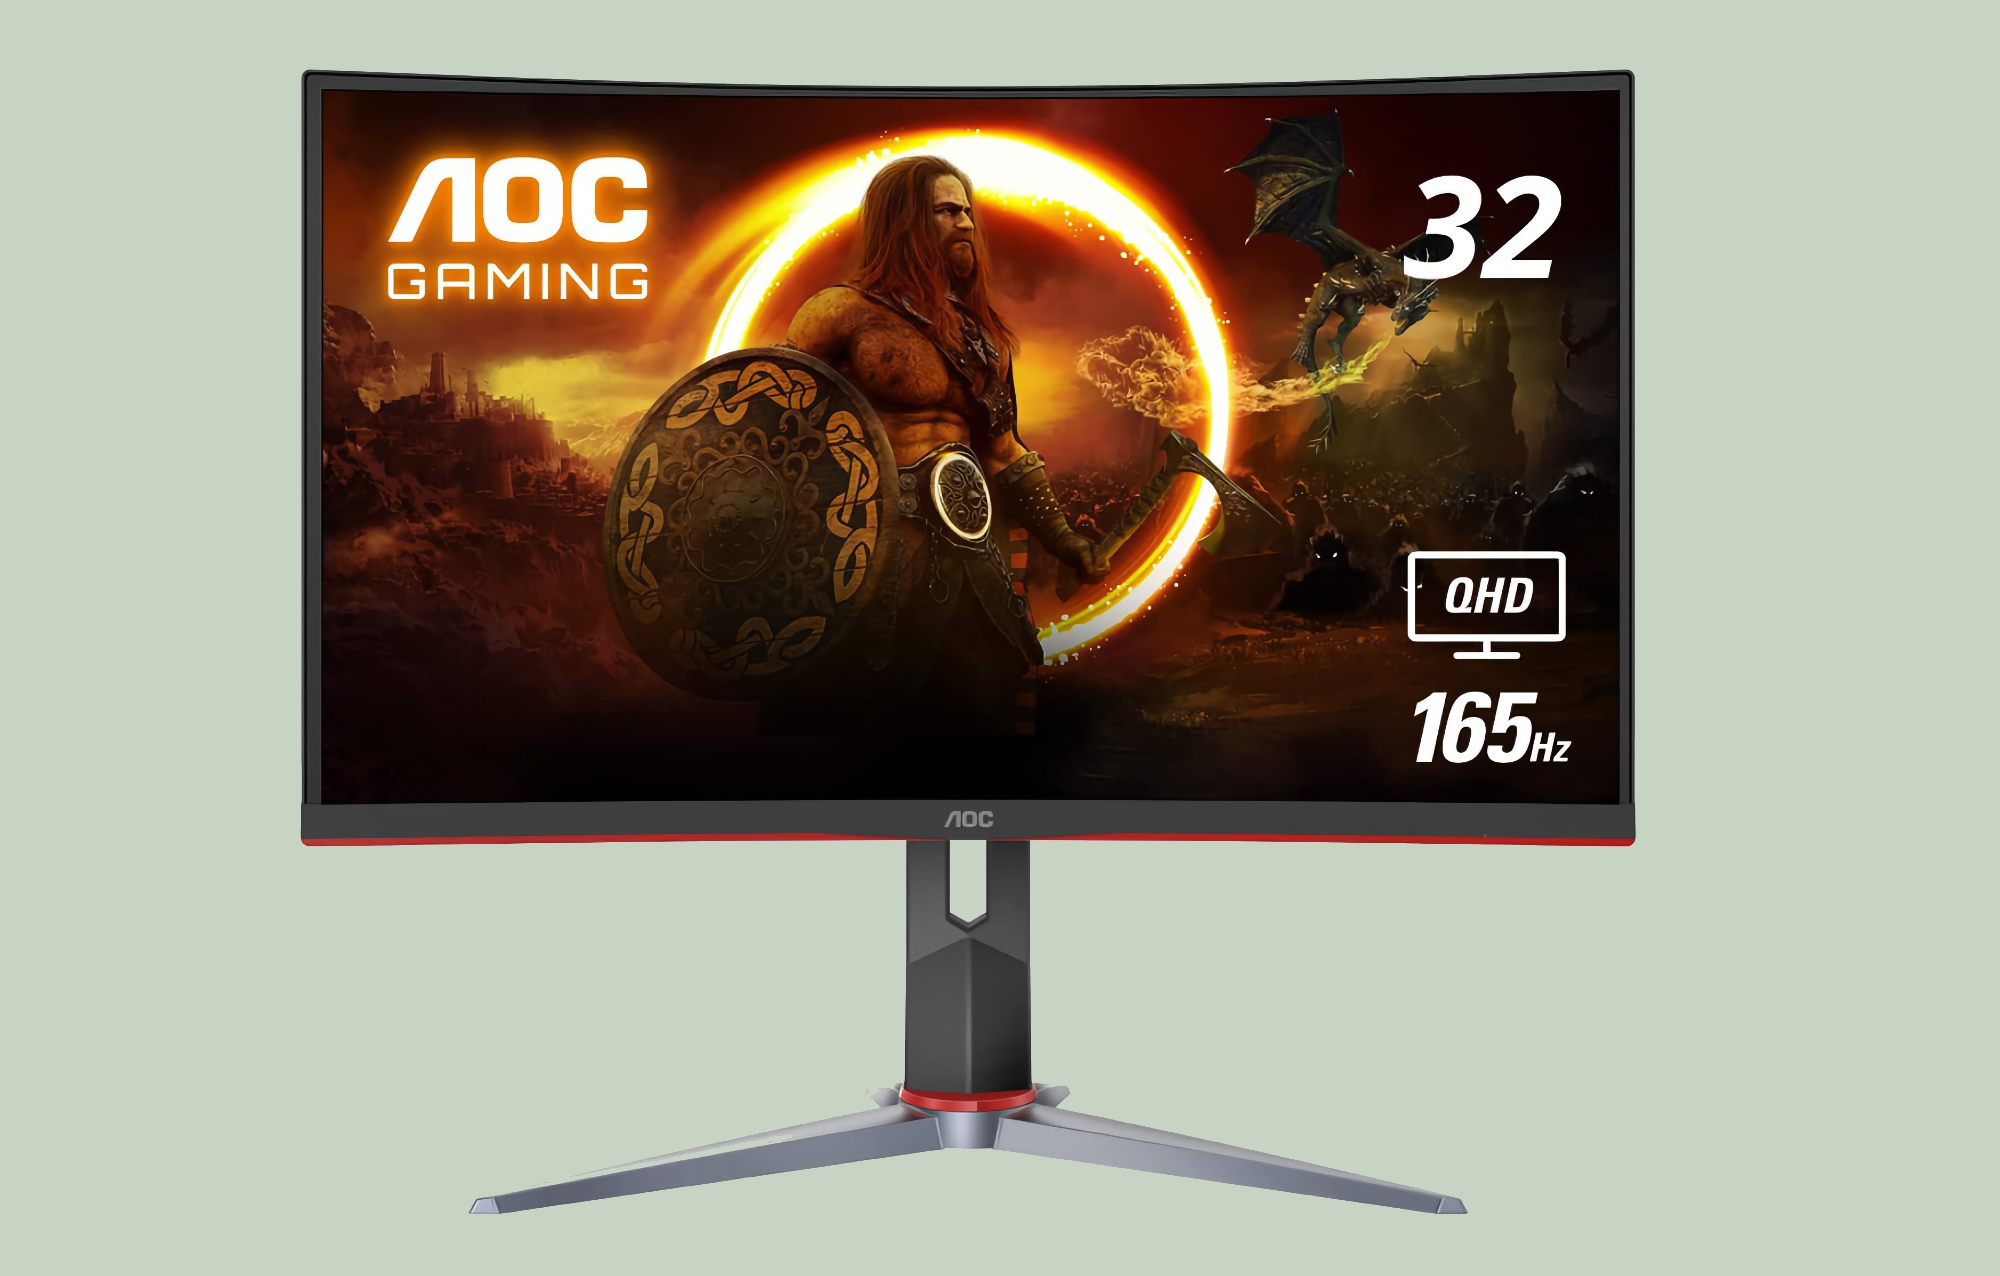 The AOC CQ32G2S with 32-inch curved screen and 165Hz can be bought on Amazon for $30 off